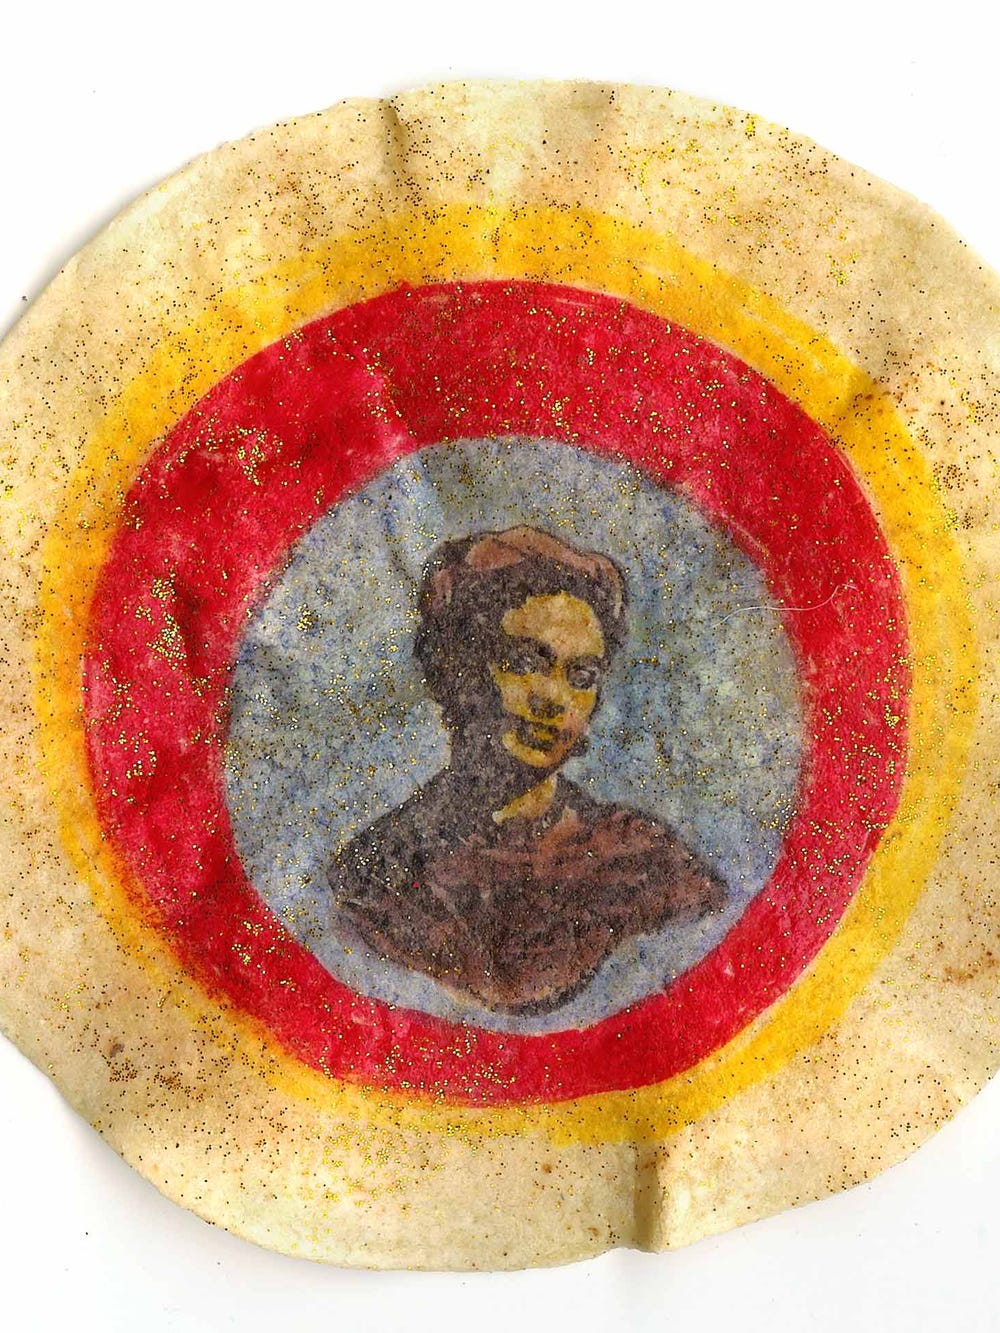 Tortilla with Frida Kahlo’s image on it